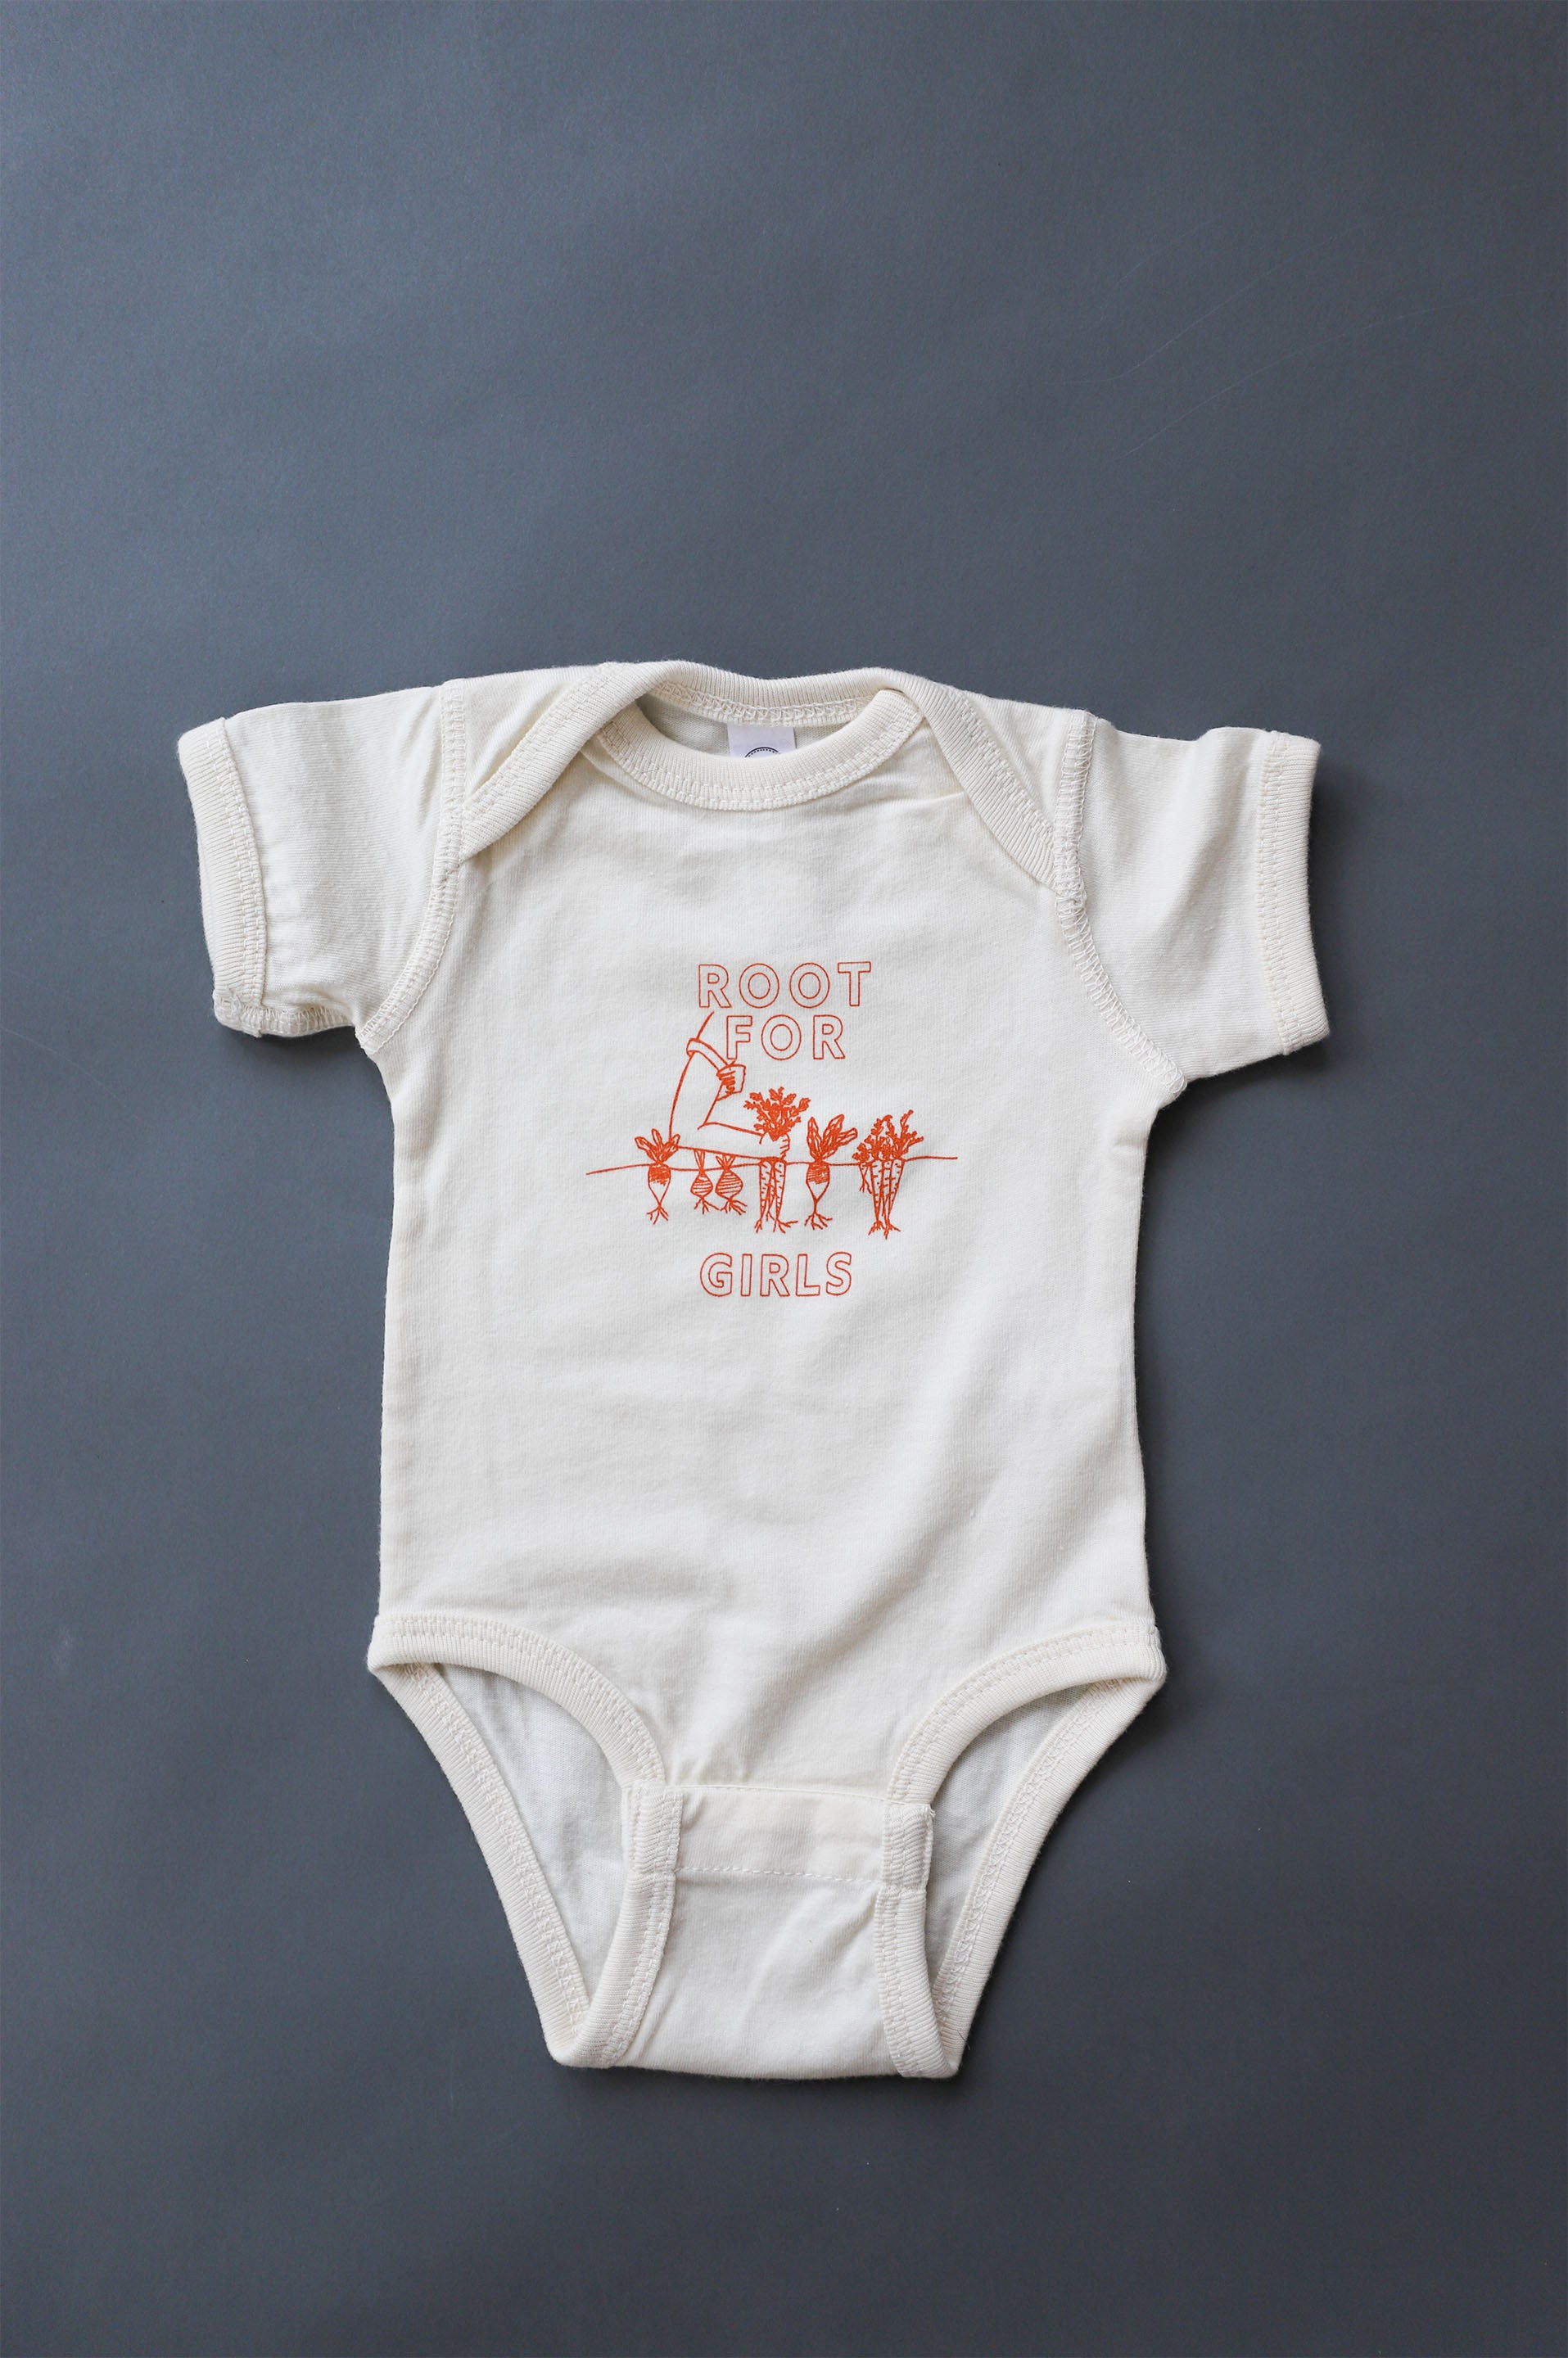 A natural color baby onesie with "Root for Girls" in dark orange and a gardening illustration 